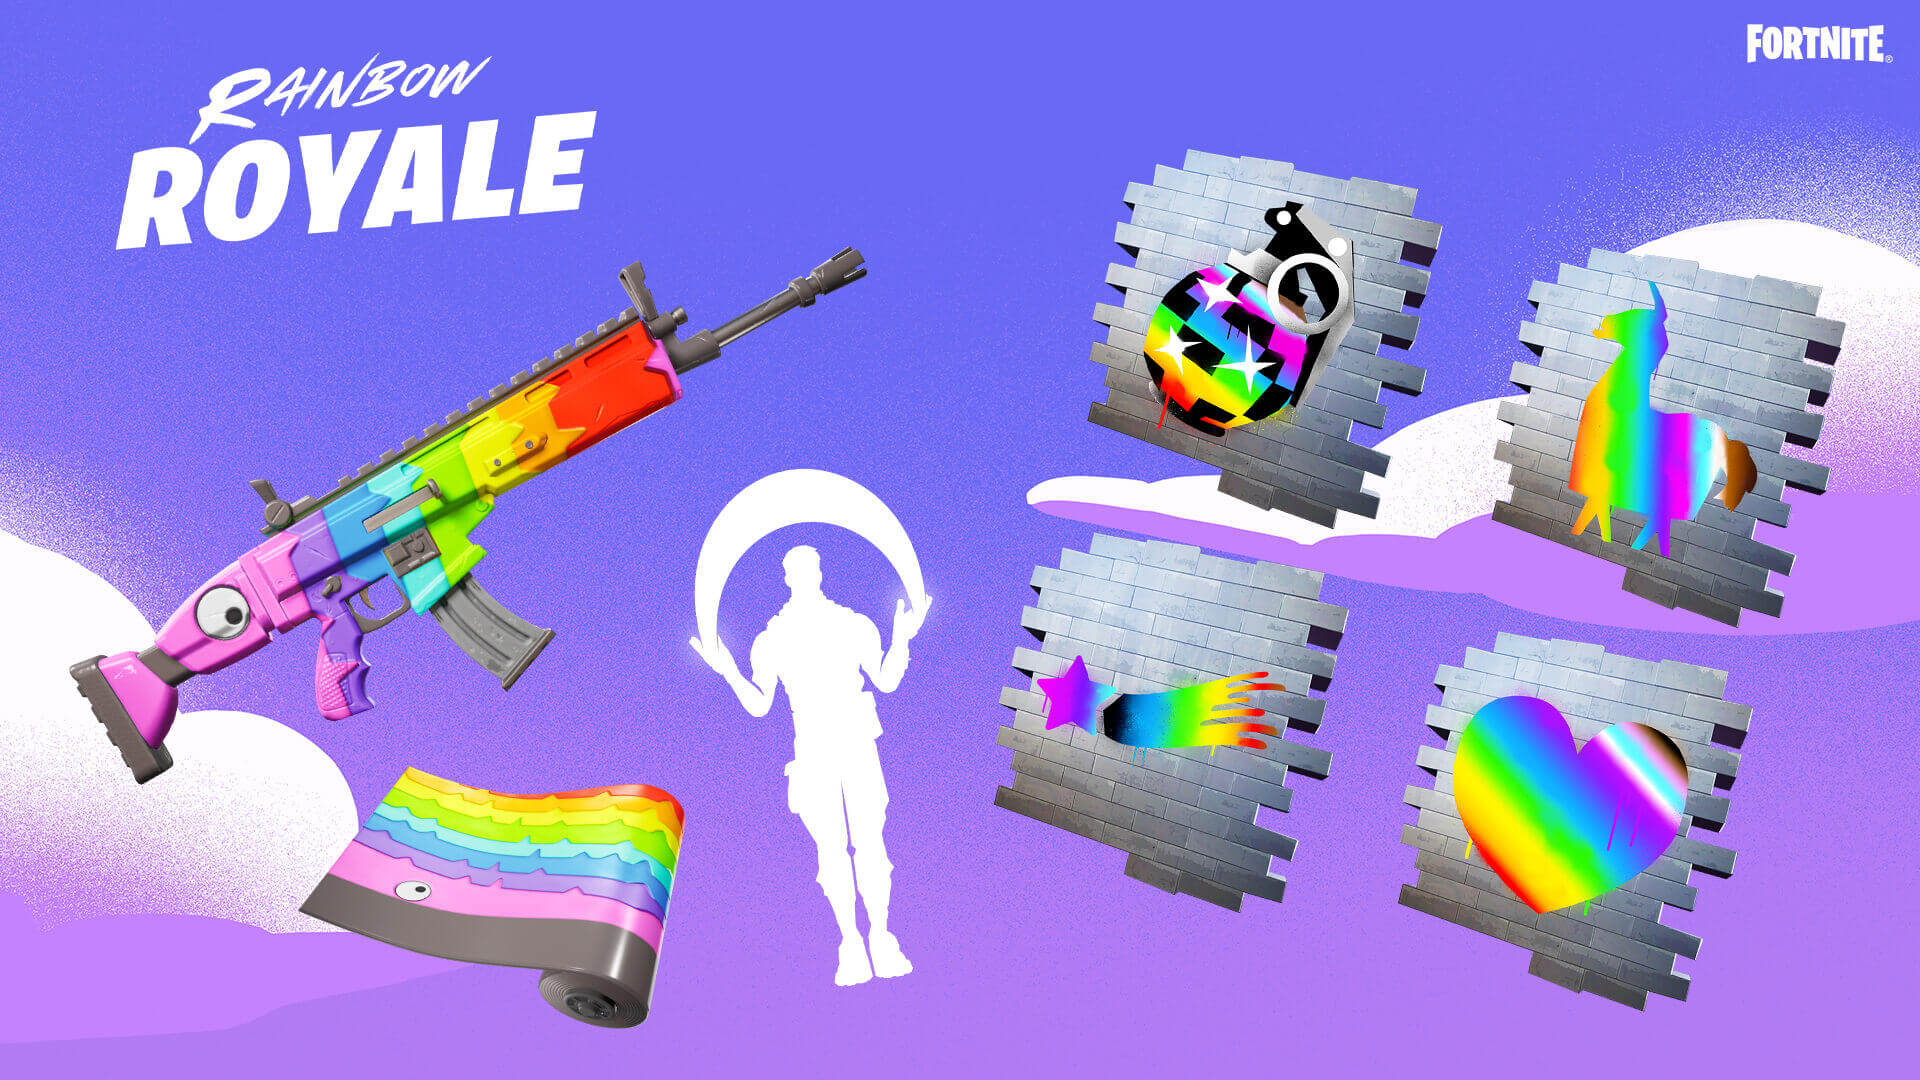 Fortnite Launches New Rainbow Royale Event